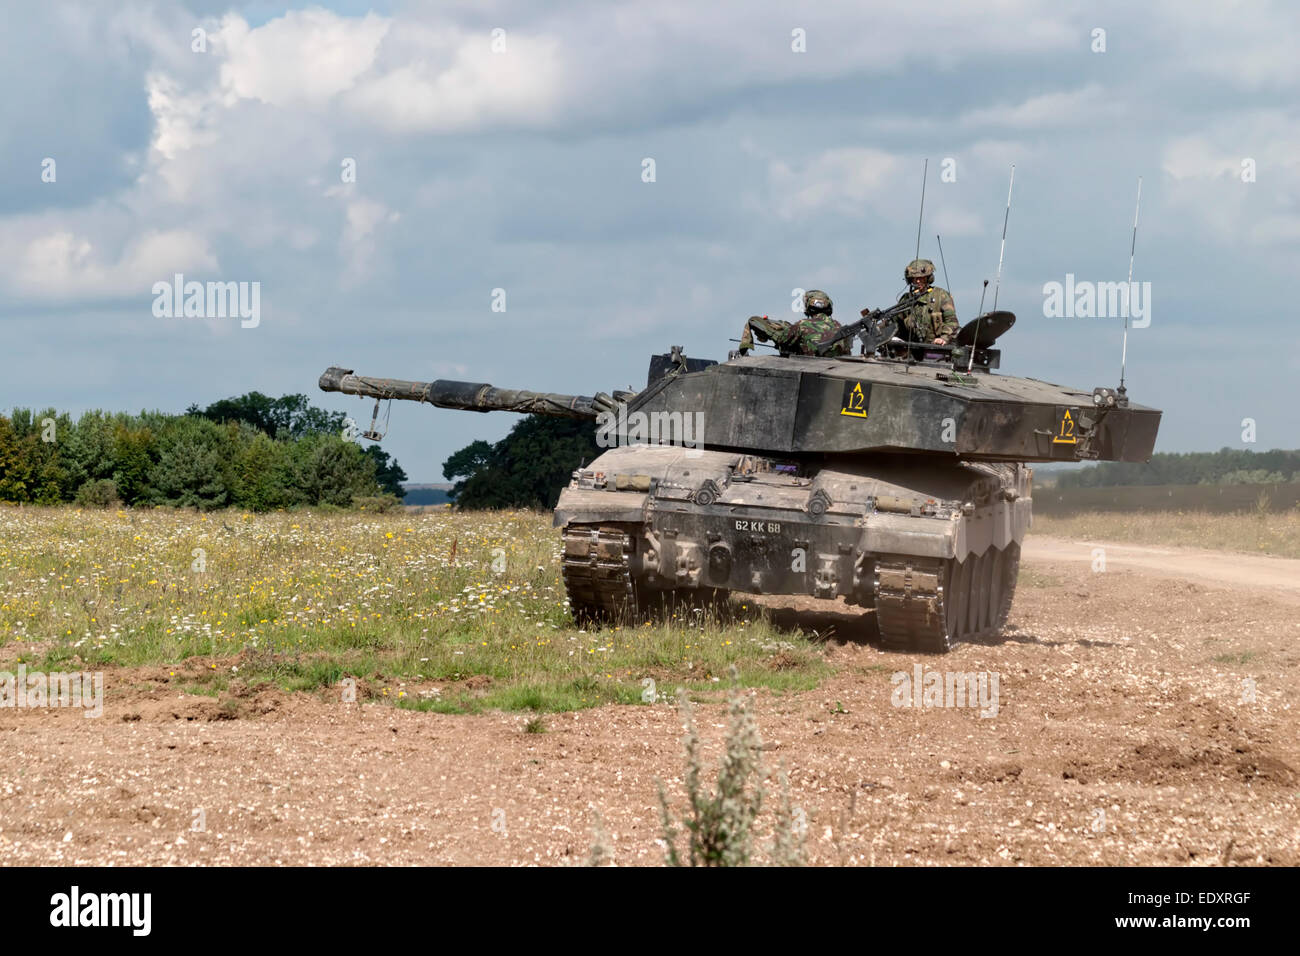 Challenger 2 Main Battle Tank (MBT) of the British Army on exercise on the Salisbury Plain Military Training Area Wiltshire, UK. Stock Photo